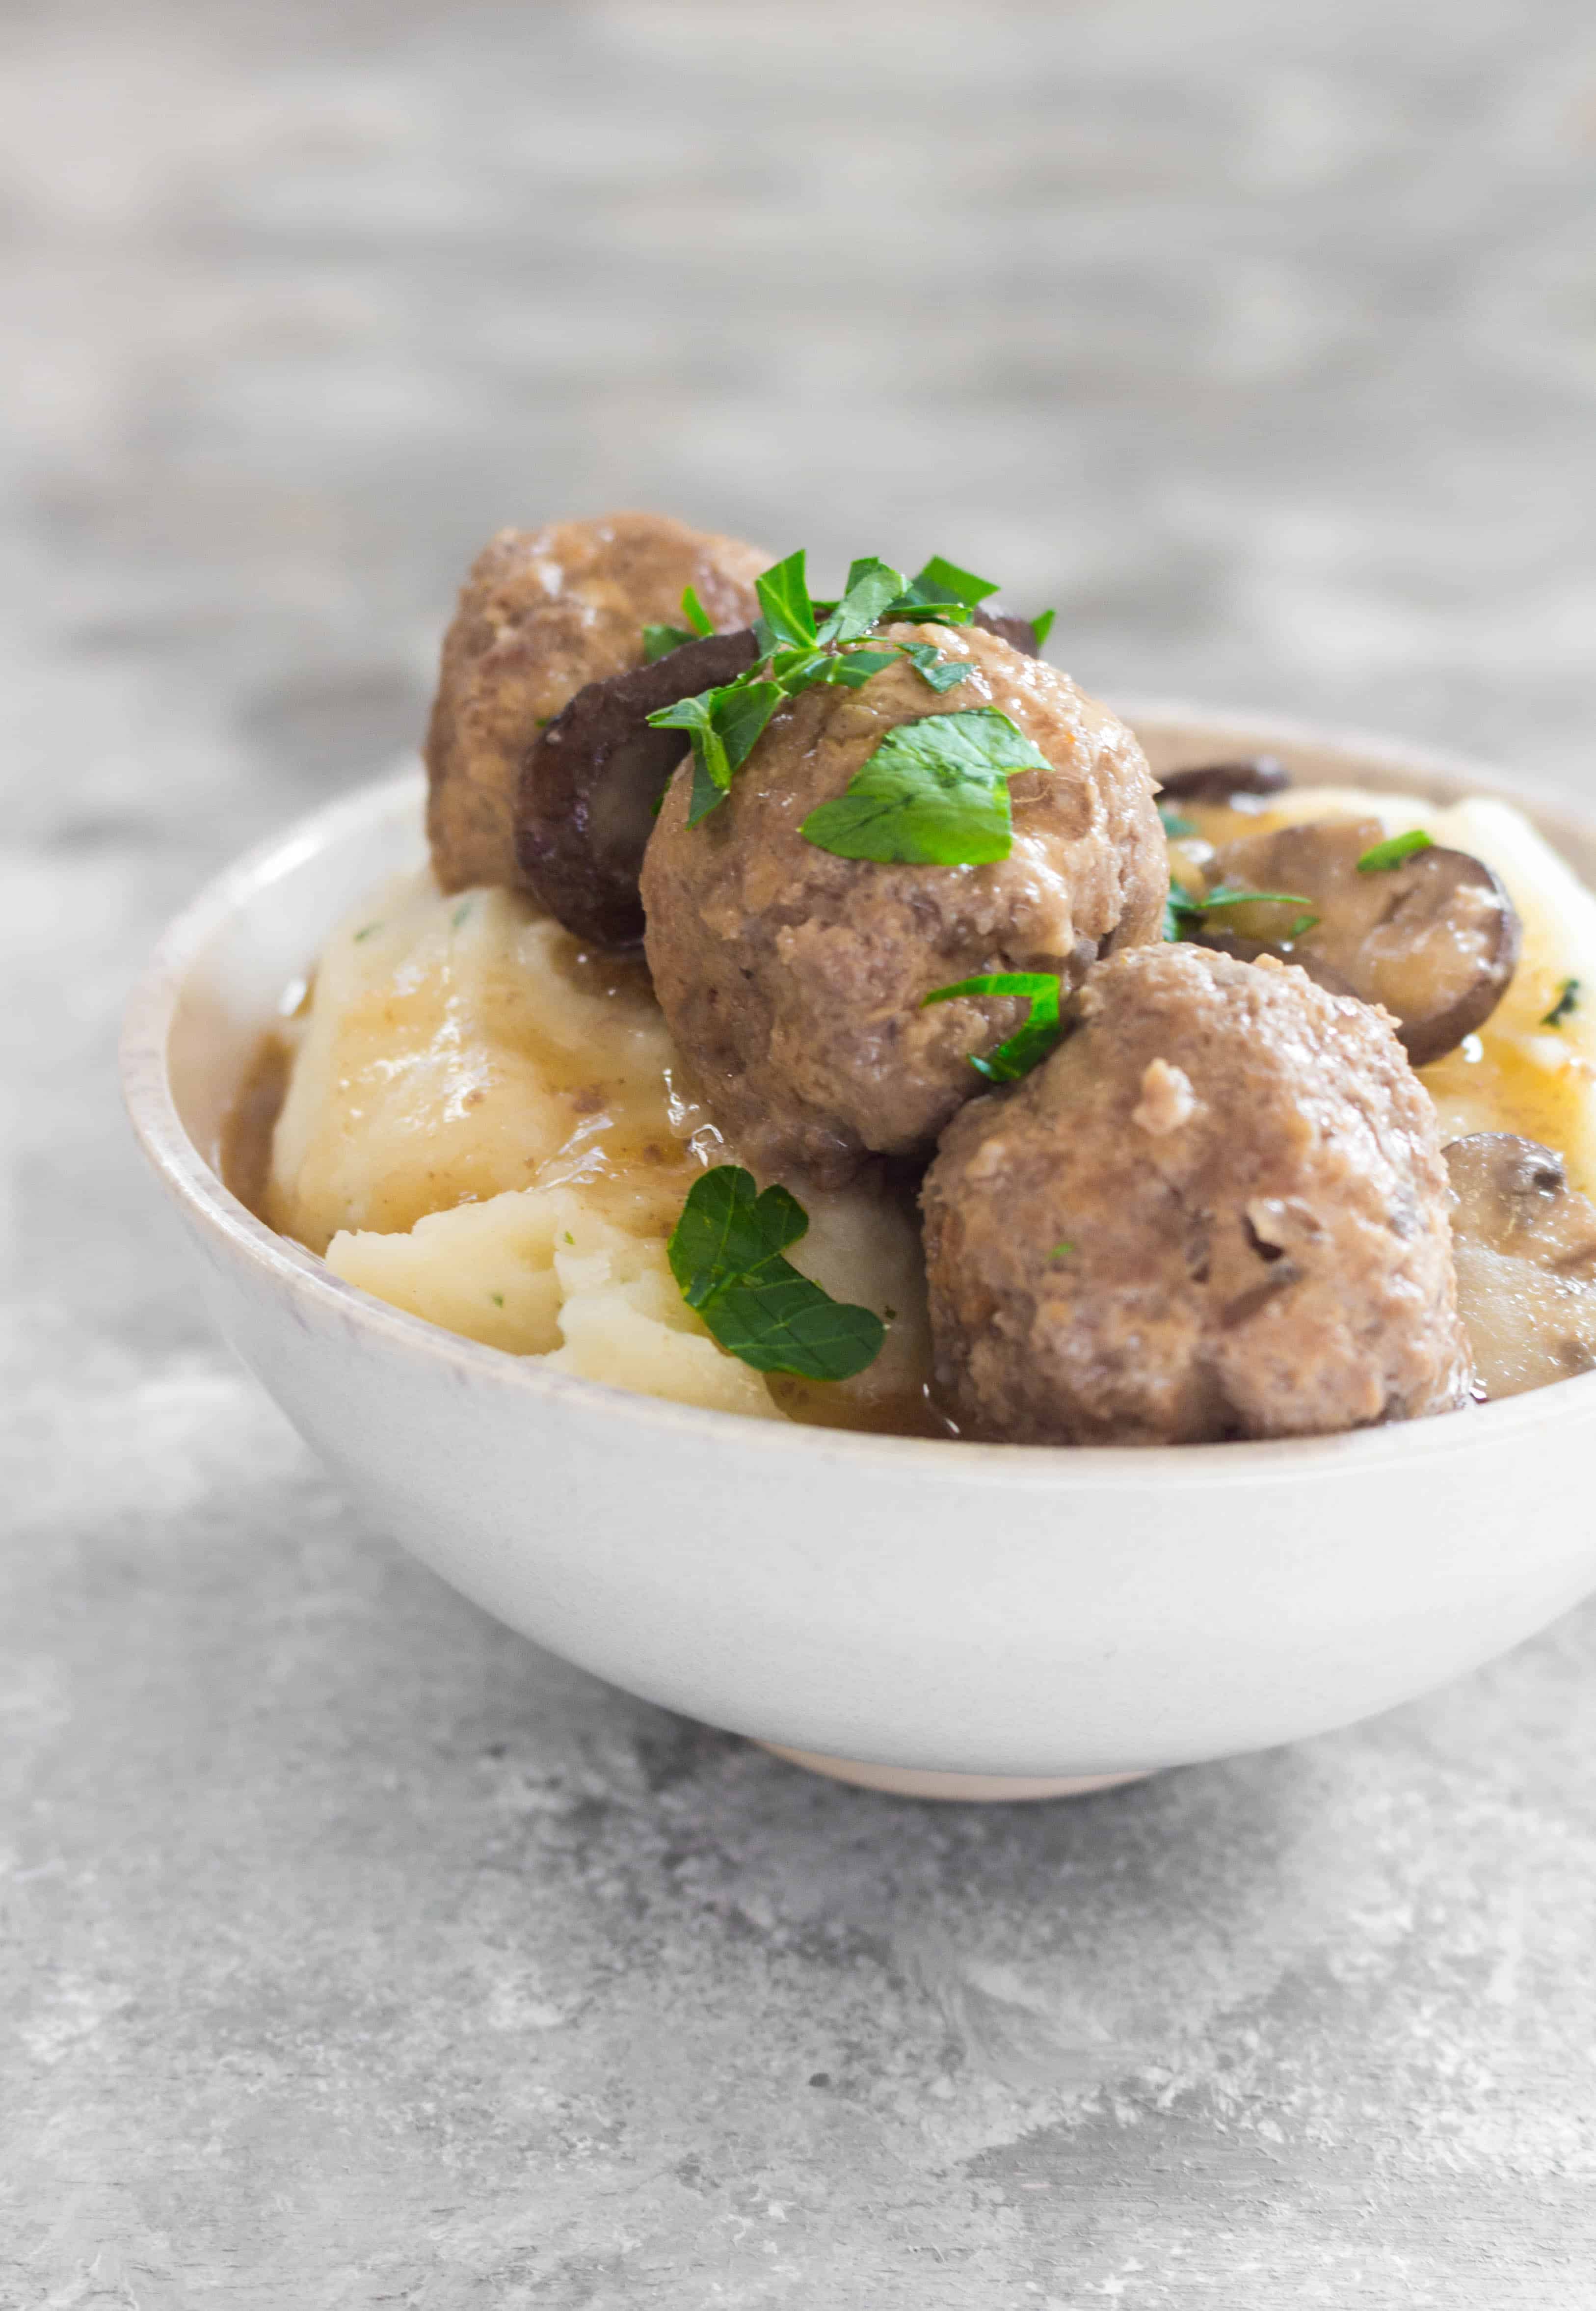 This Instant Pot Salisbury Steak Styled Meatballs Recipe is inspired by the salisbury steak frozen dinners in the frozen food aisle. These yummy salisbury steak meatballs are lightened up by using both turkey meat and beef with mushrooms and take under 30 minutes to make!